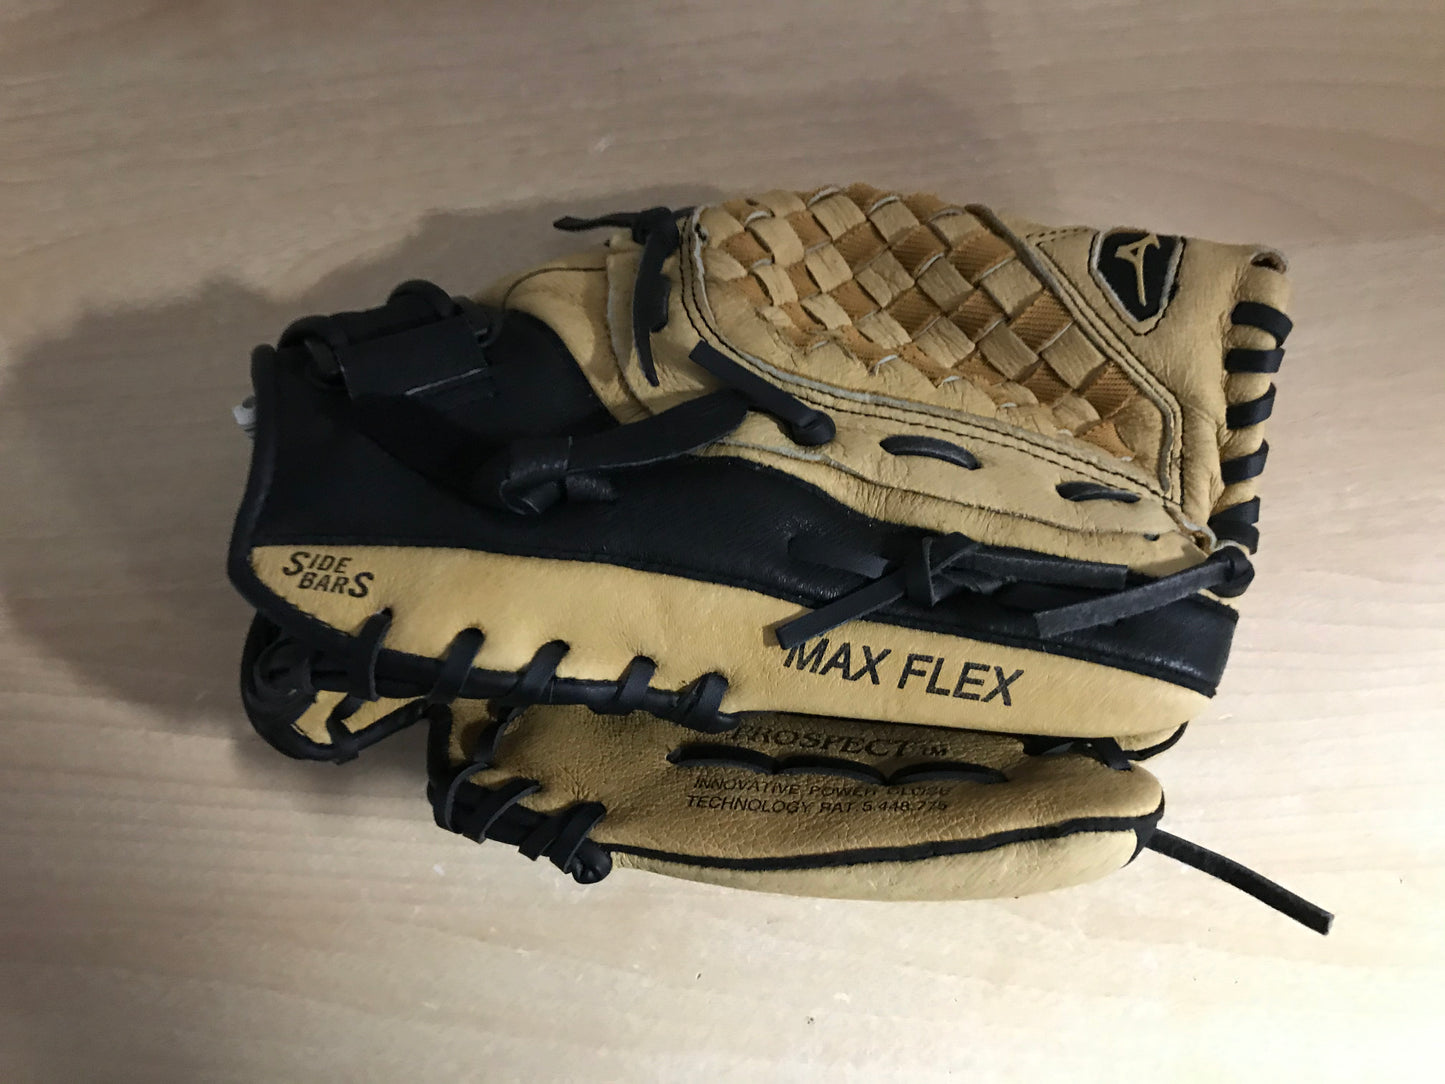 Baseball Glove Adult Size 11.5 inch Mizuno Max Flex Black Brown Soft Leather Fits on LEFT Hand As New